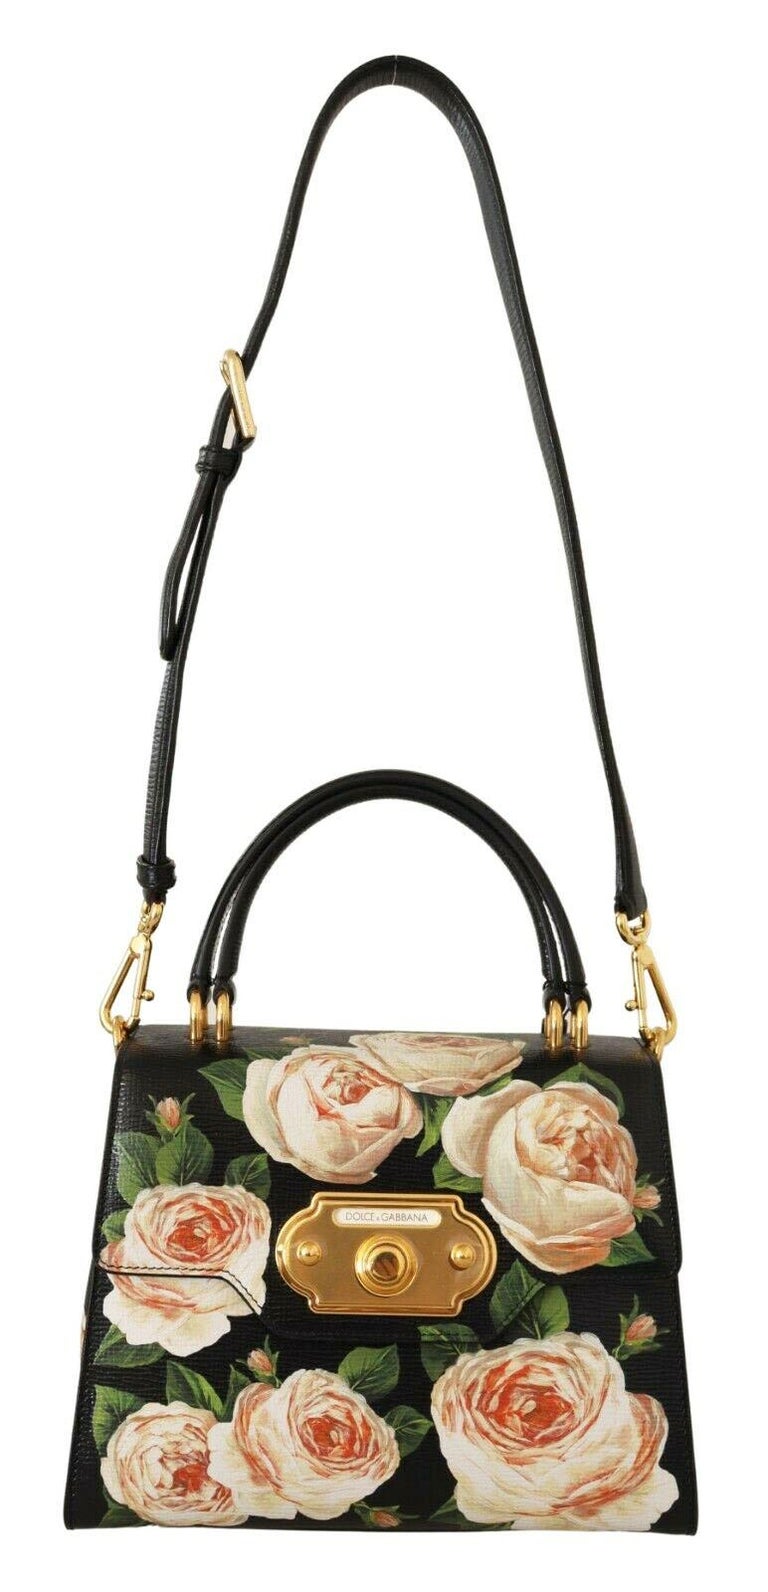 Floral velvet bag: discover the functionality and femininity of Elena